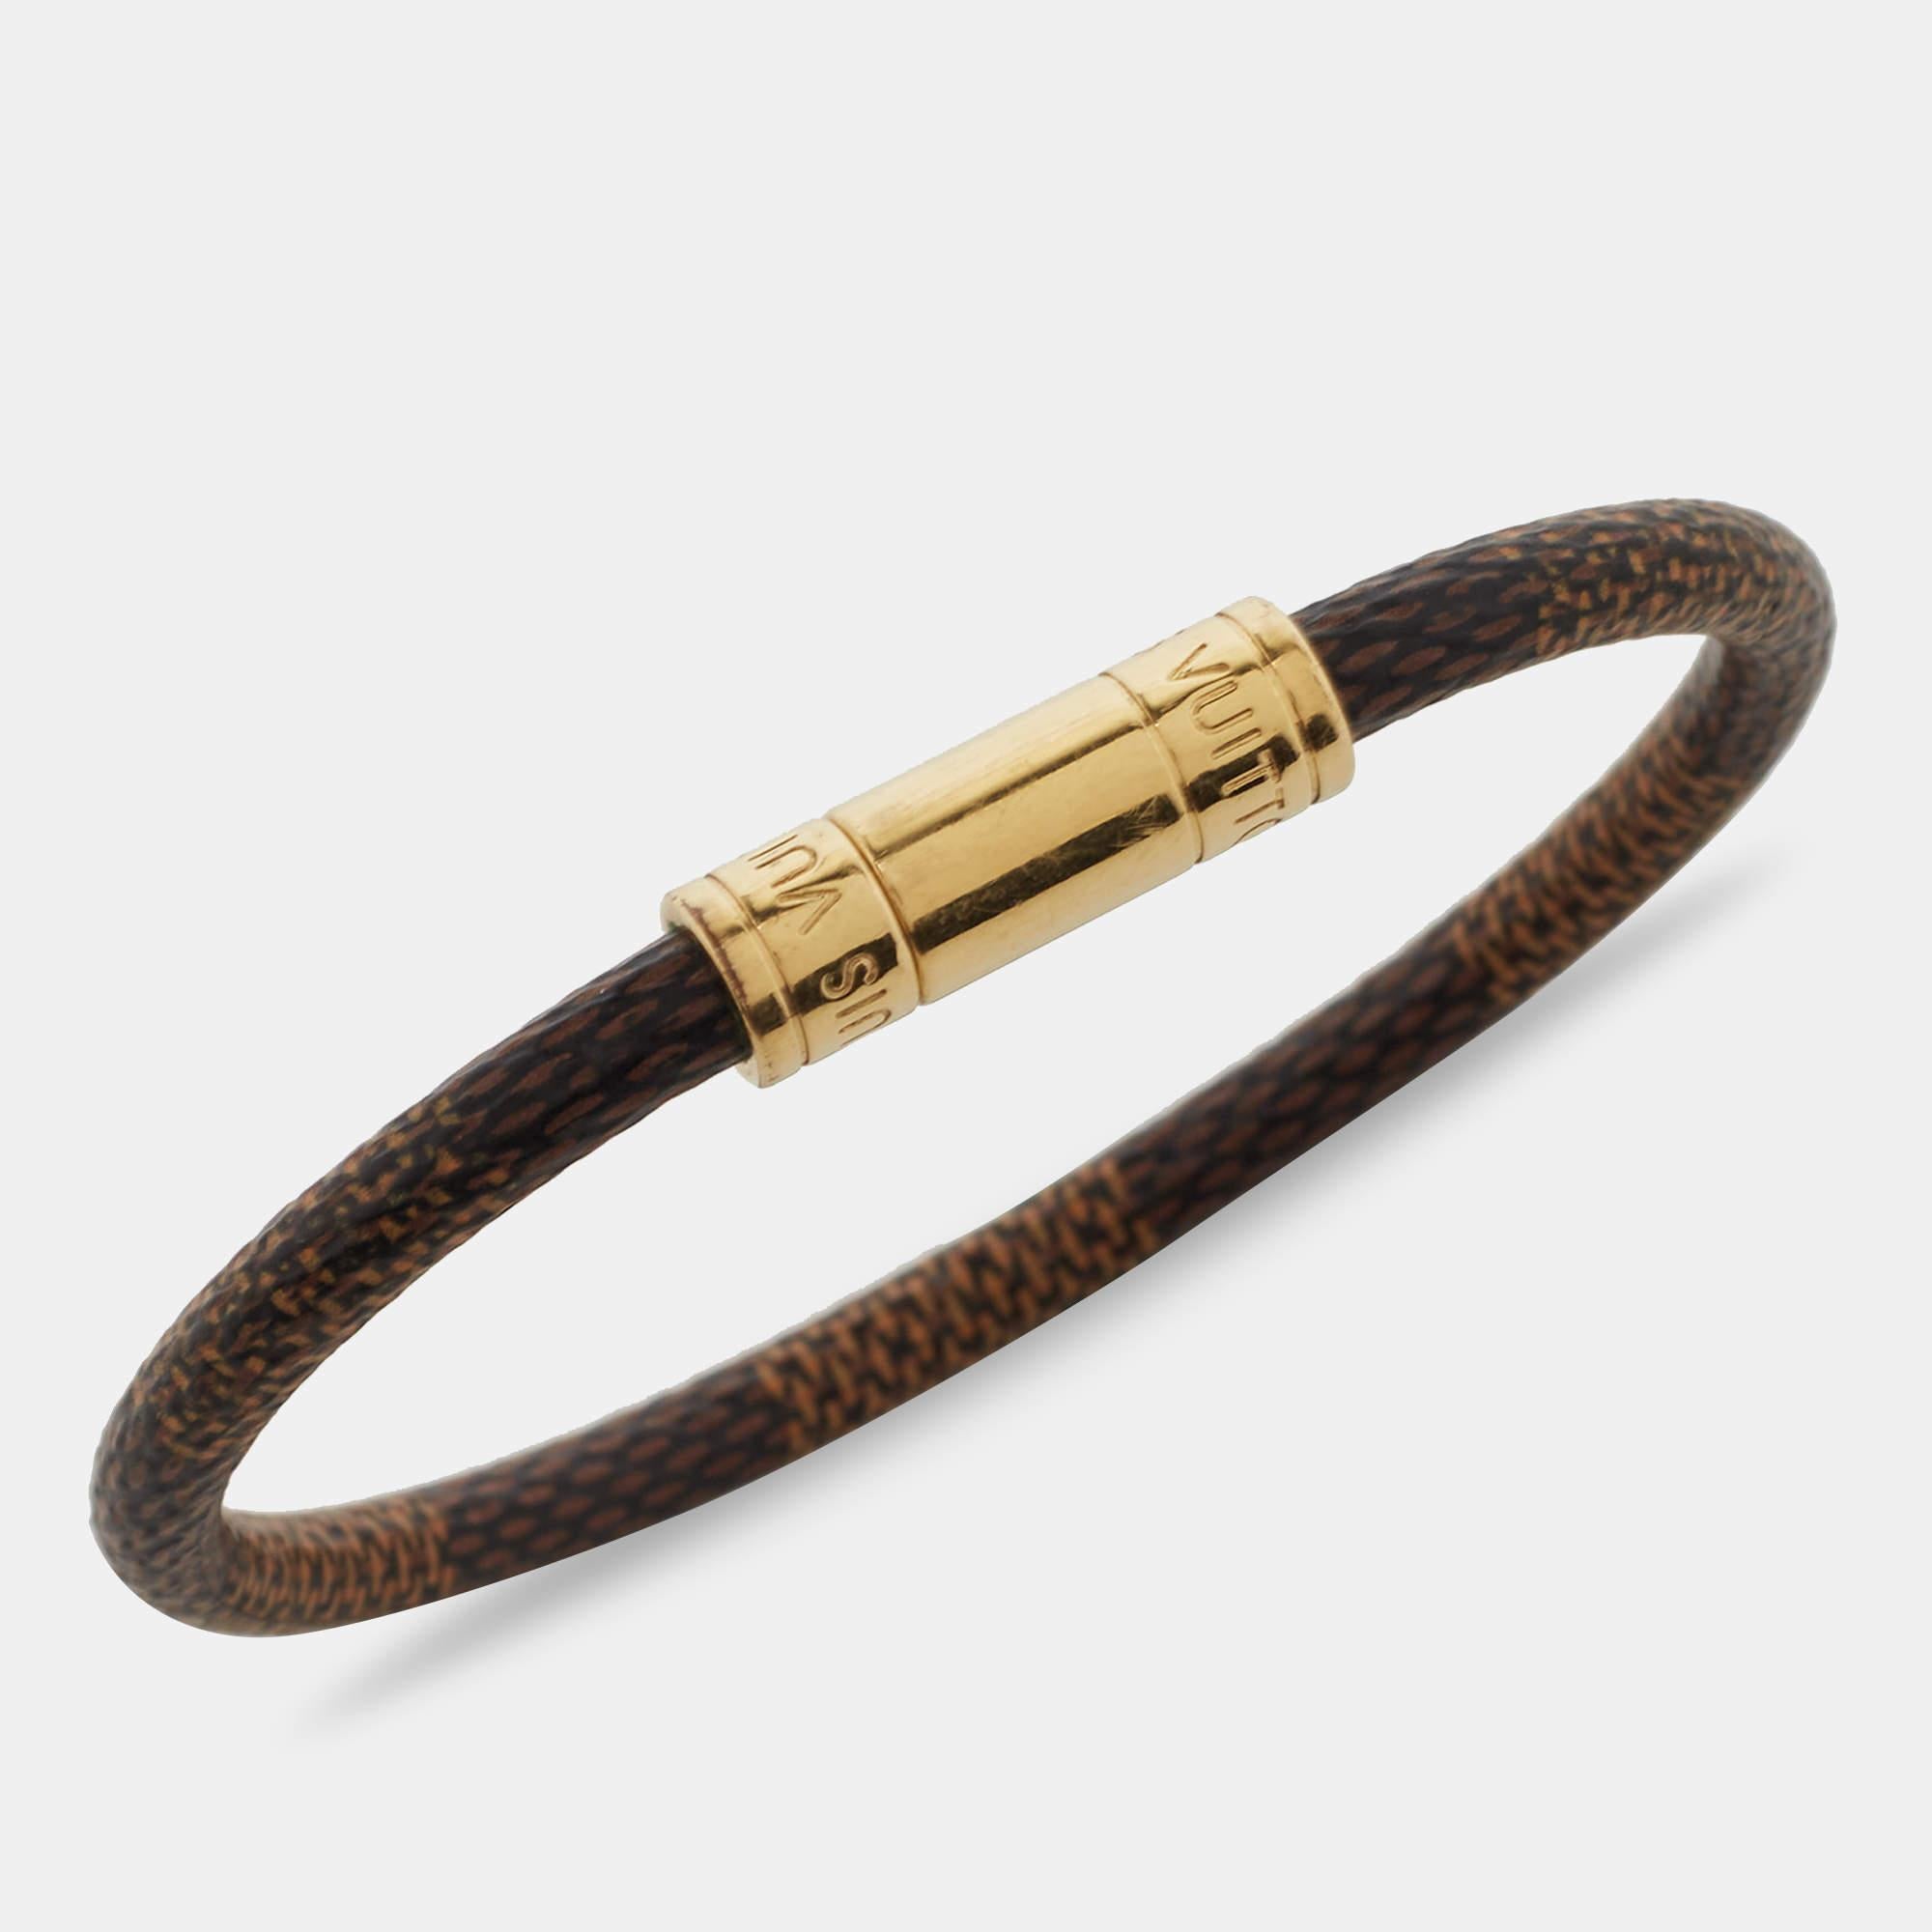 Simple yet elegant, this Louis Vuitton Keep It bracelet is designed with the label's Damier Ebene canvas and features a gold-tone metal closure. Wear it as a stand-alone piece or stack it with similar bands for a layered effect.

